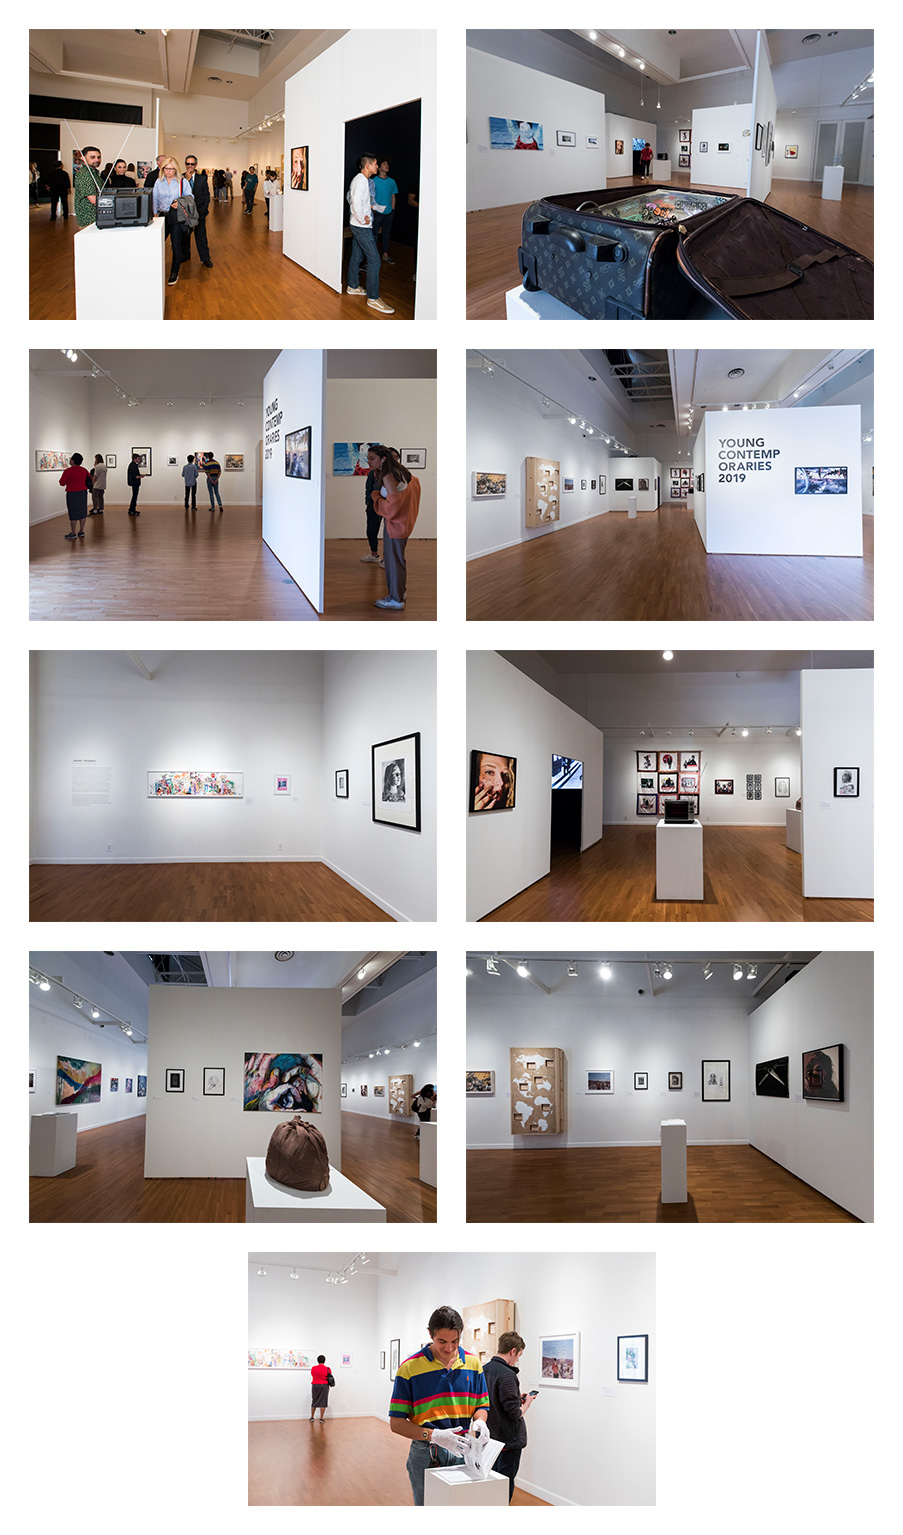 A series of images from the exhibition